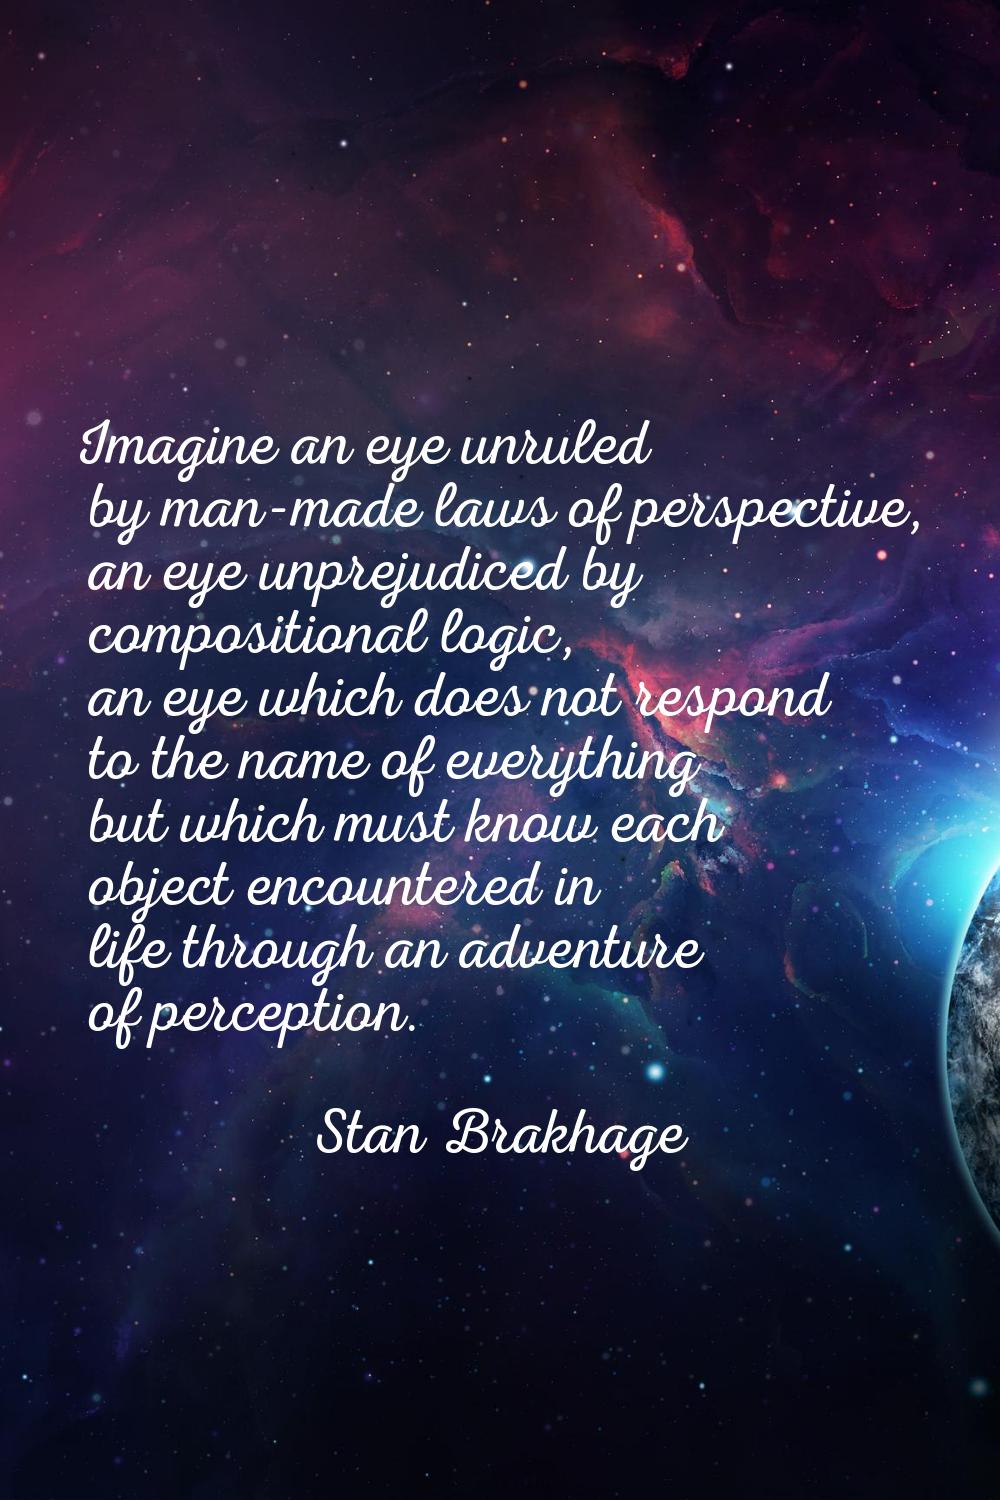 Imagine an eye unruled by man-made laws of perspective, an eye unprejudiced by compositional logic,